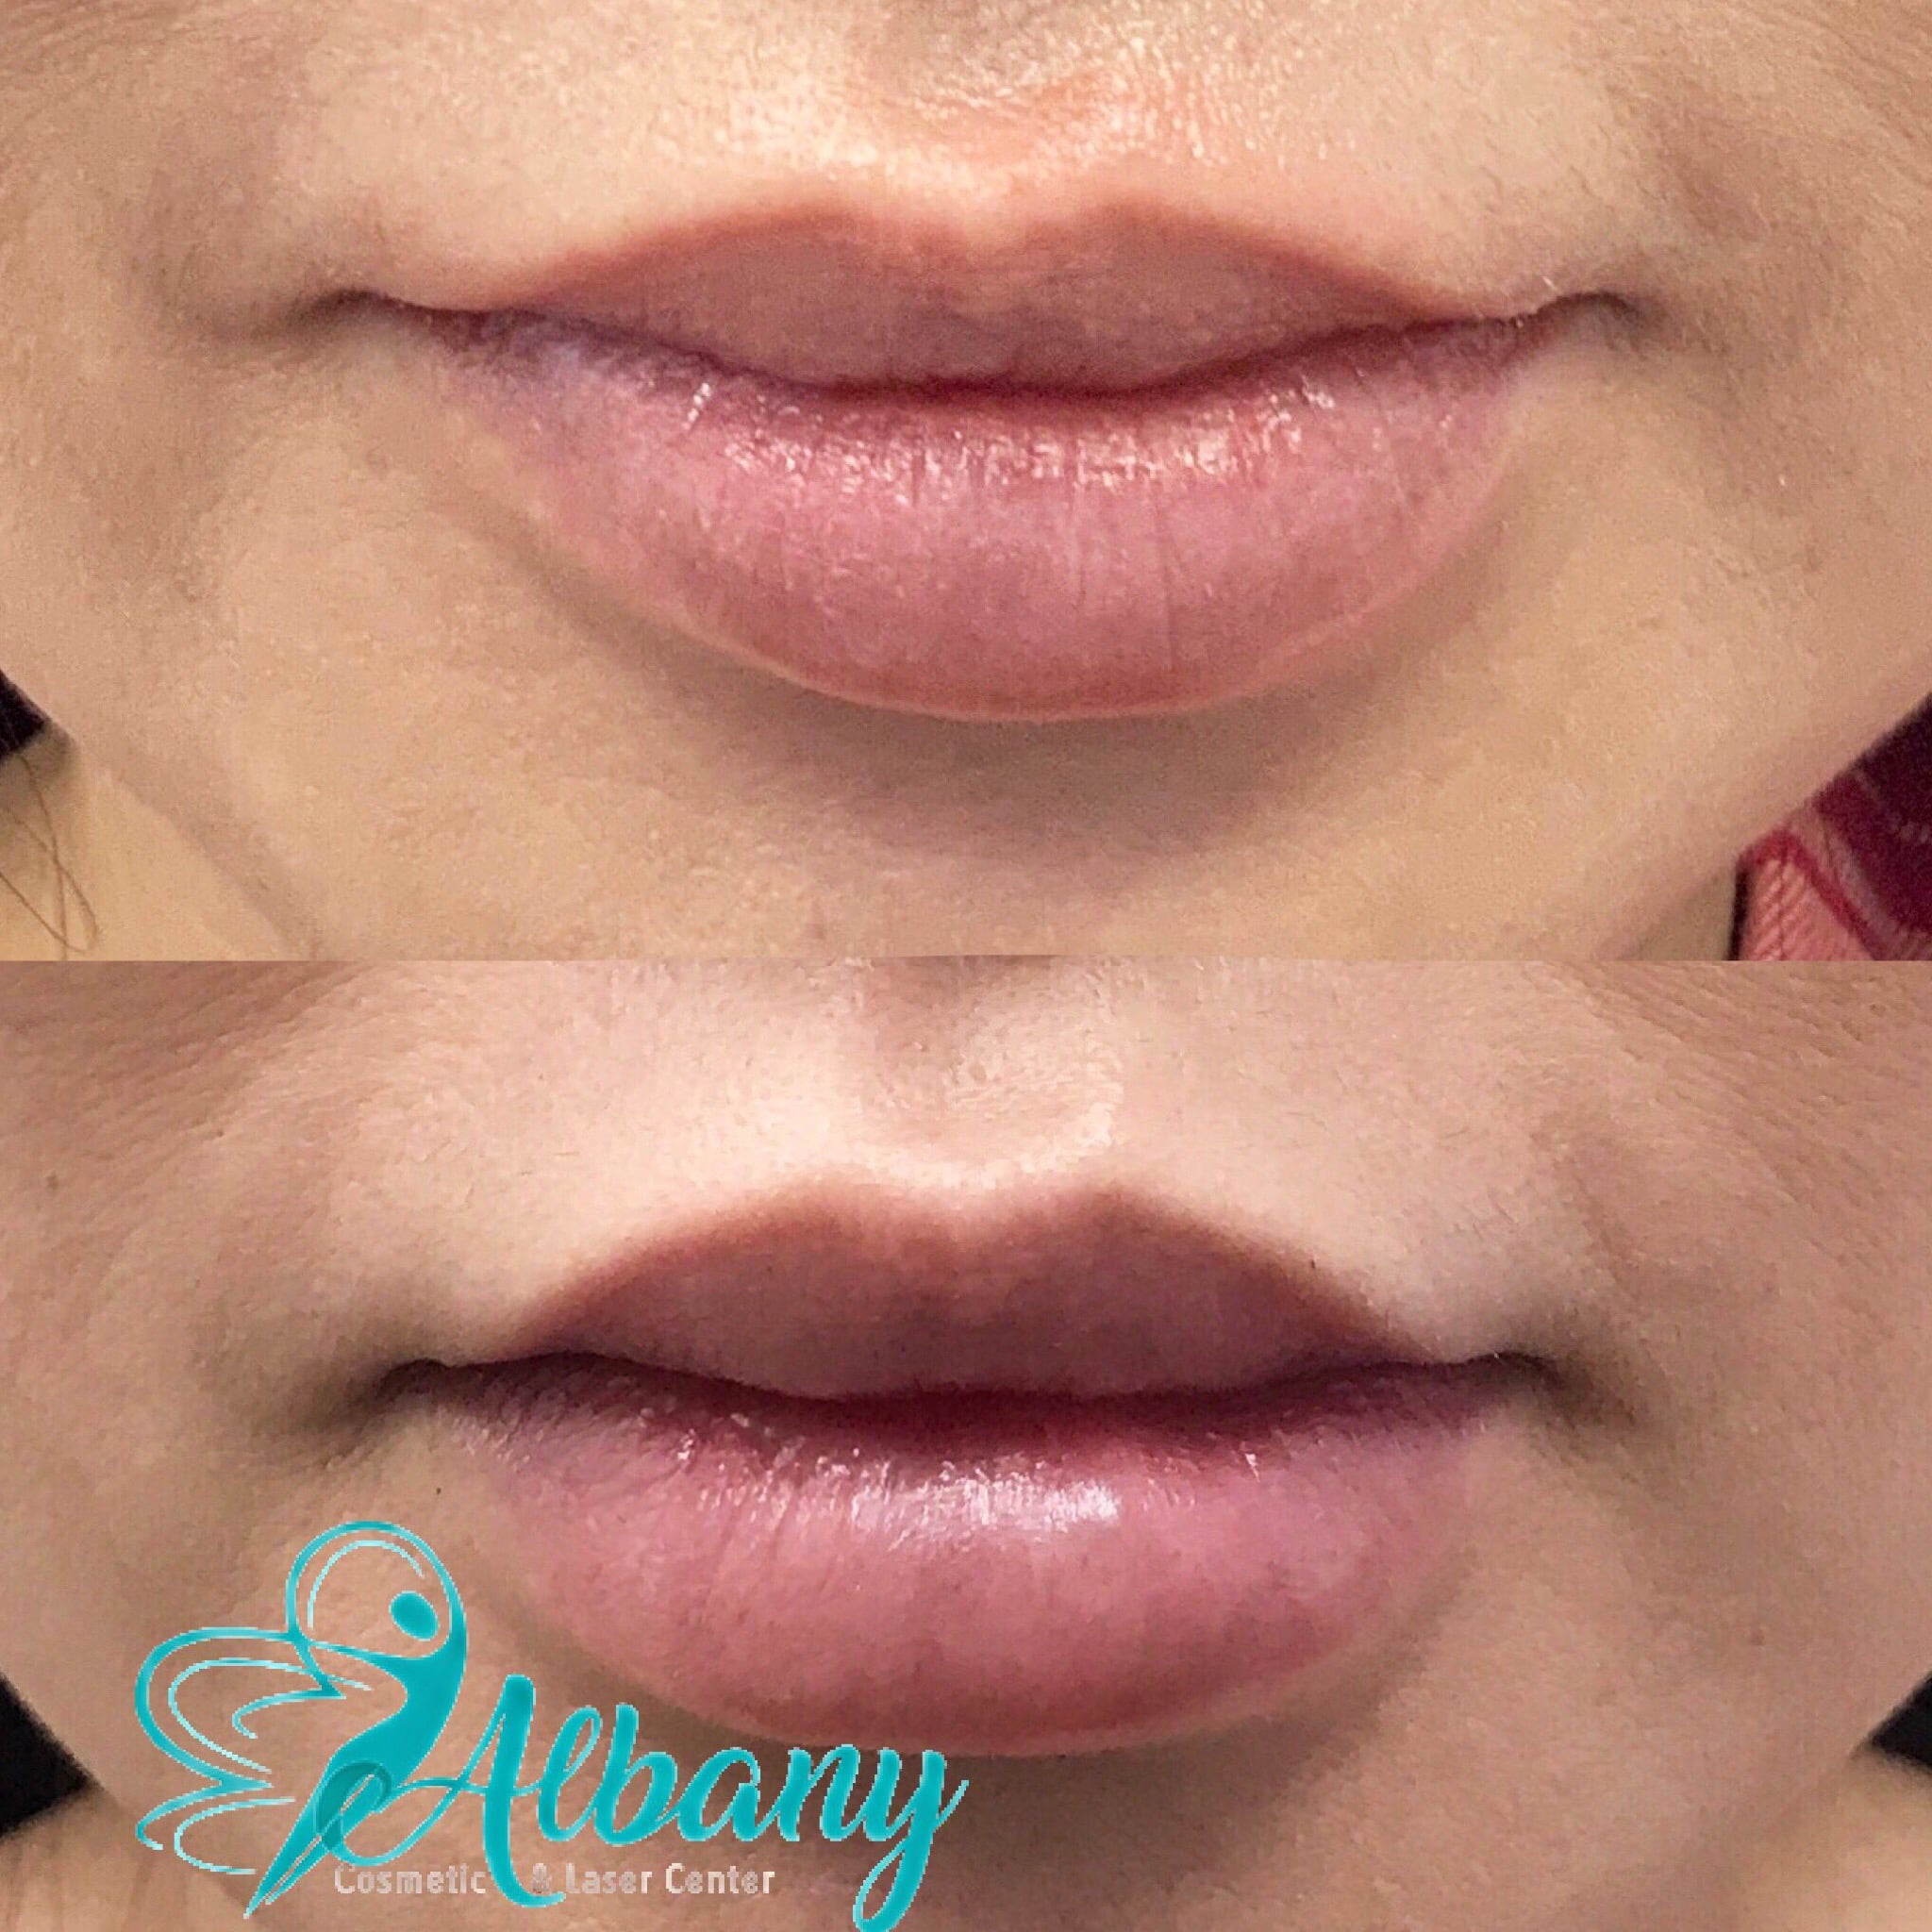 Lip fillers with Juvederm